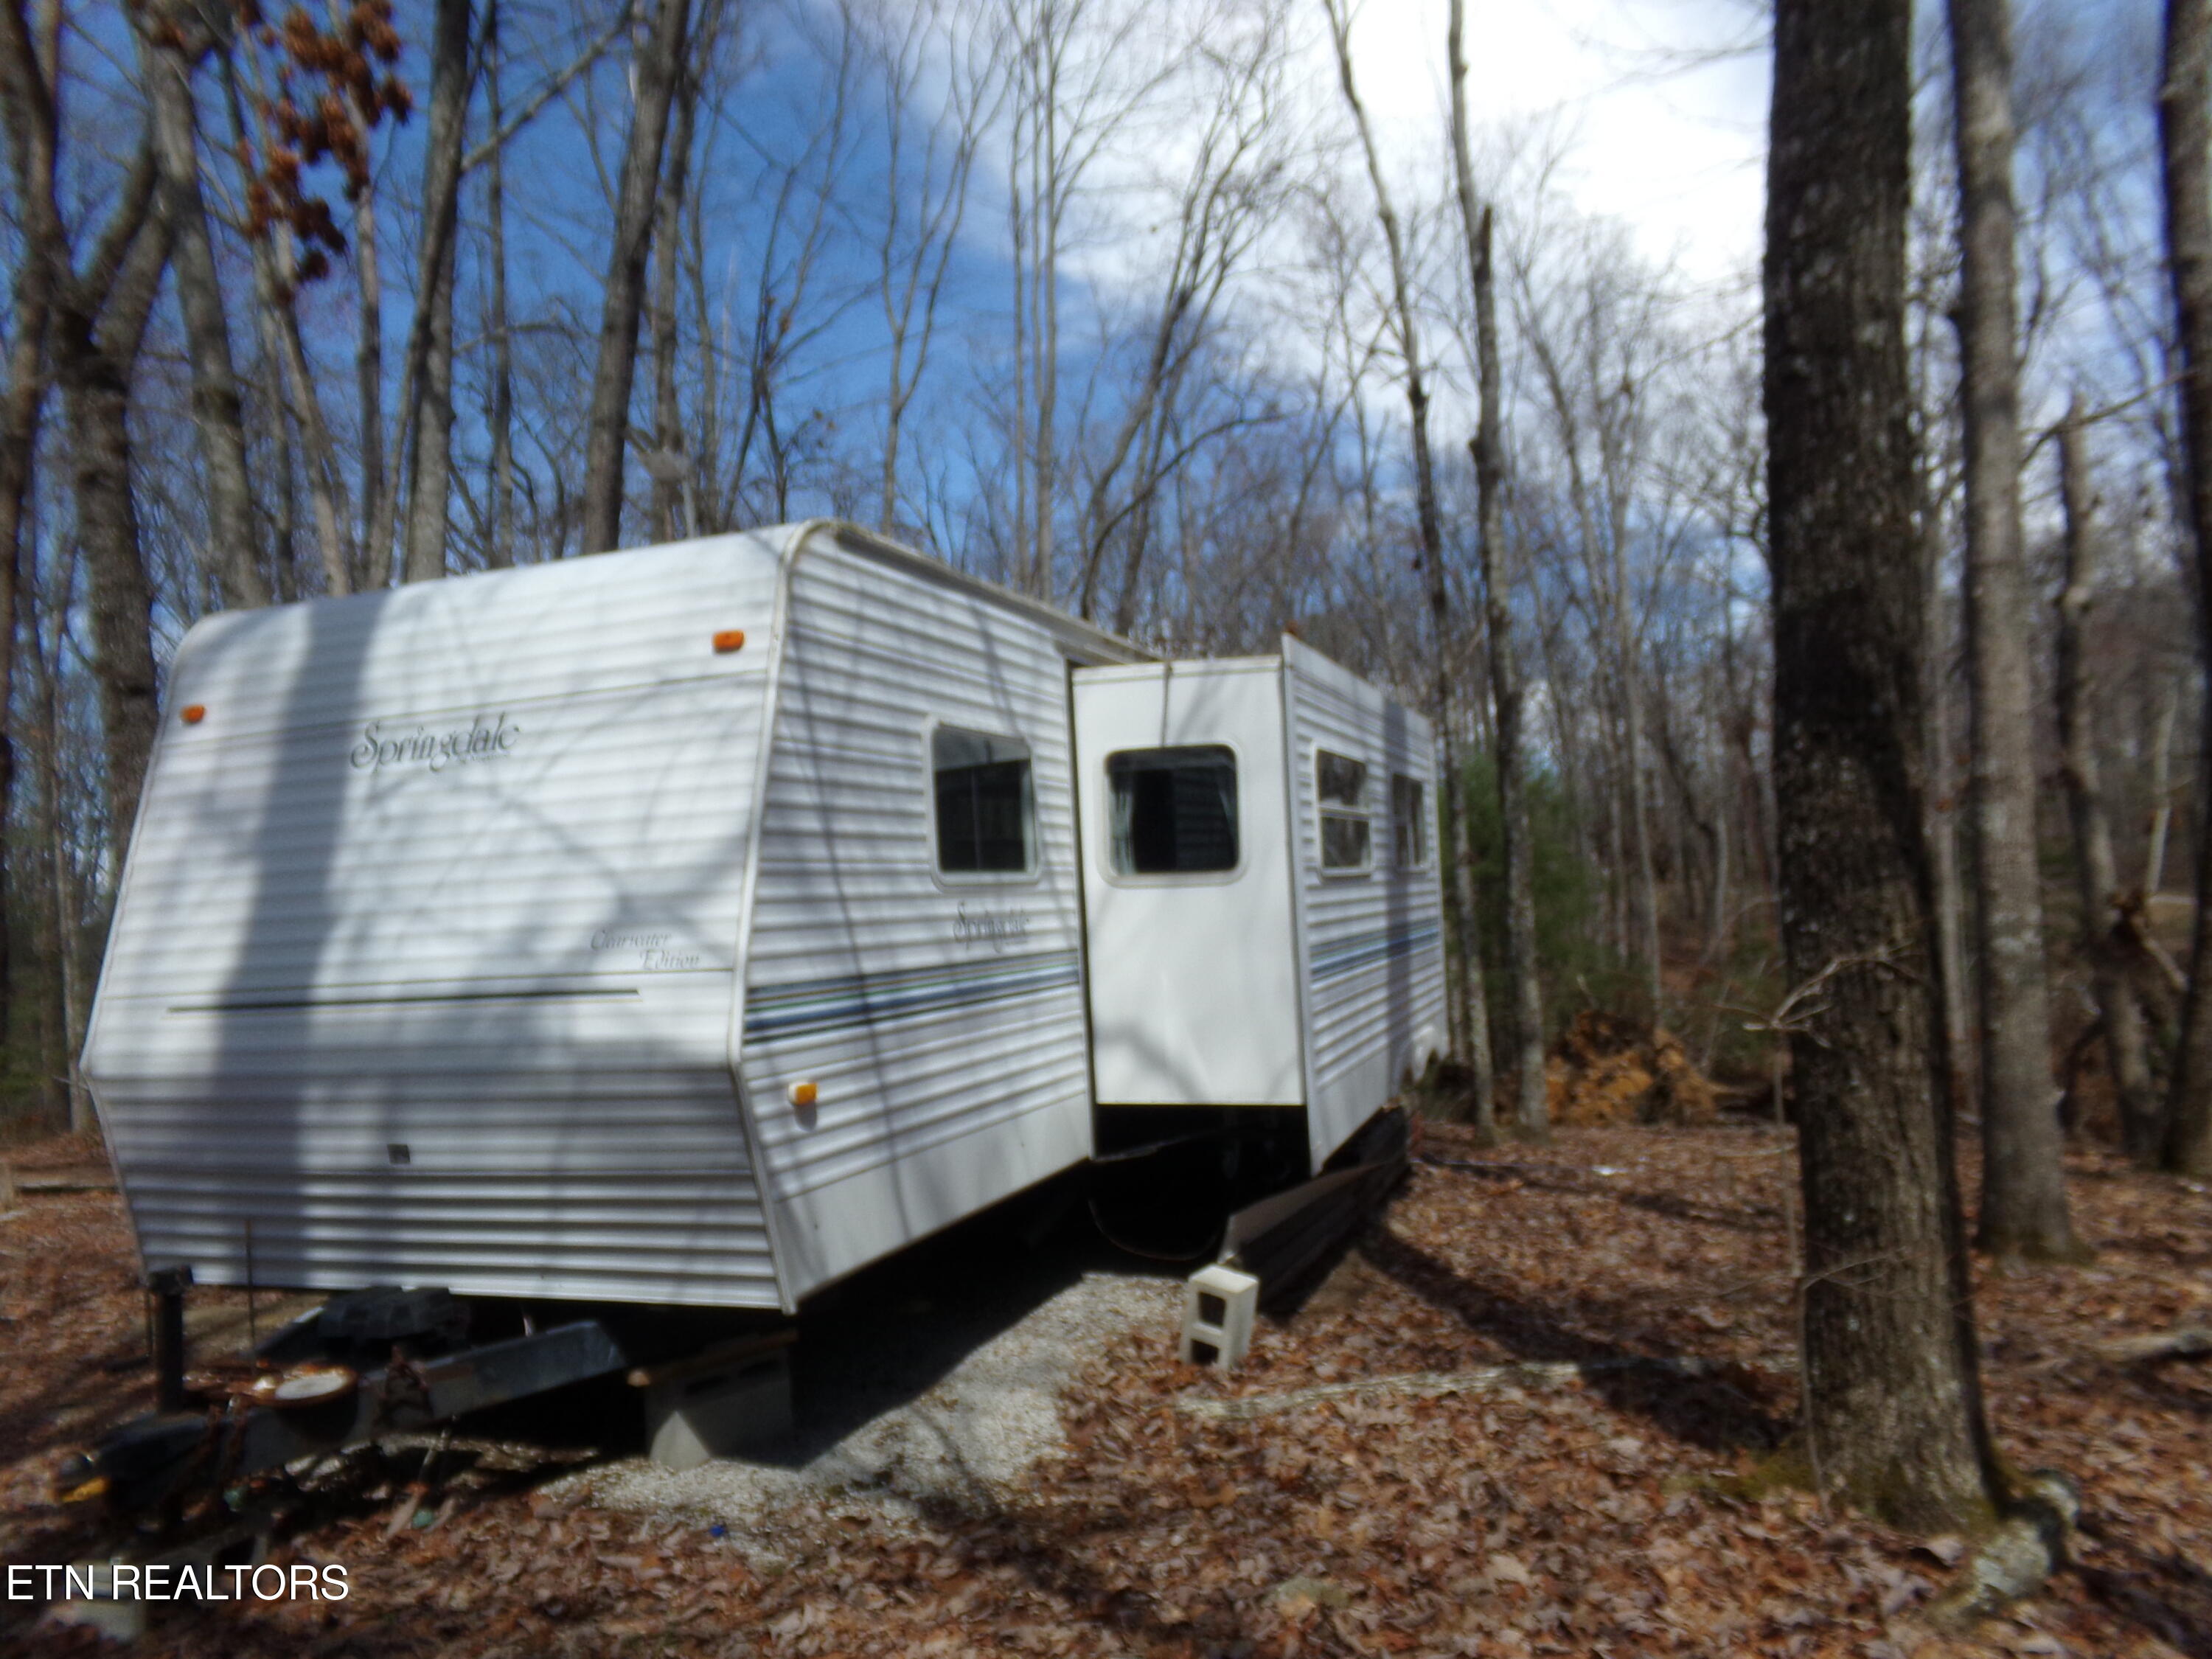 Camping Trailer on 3 Lots